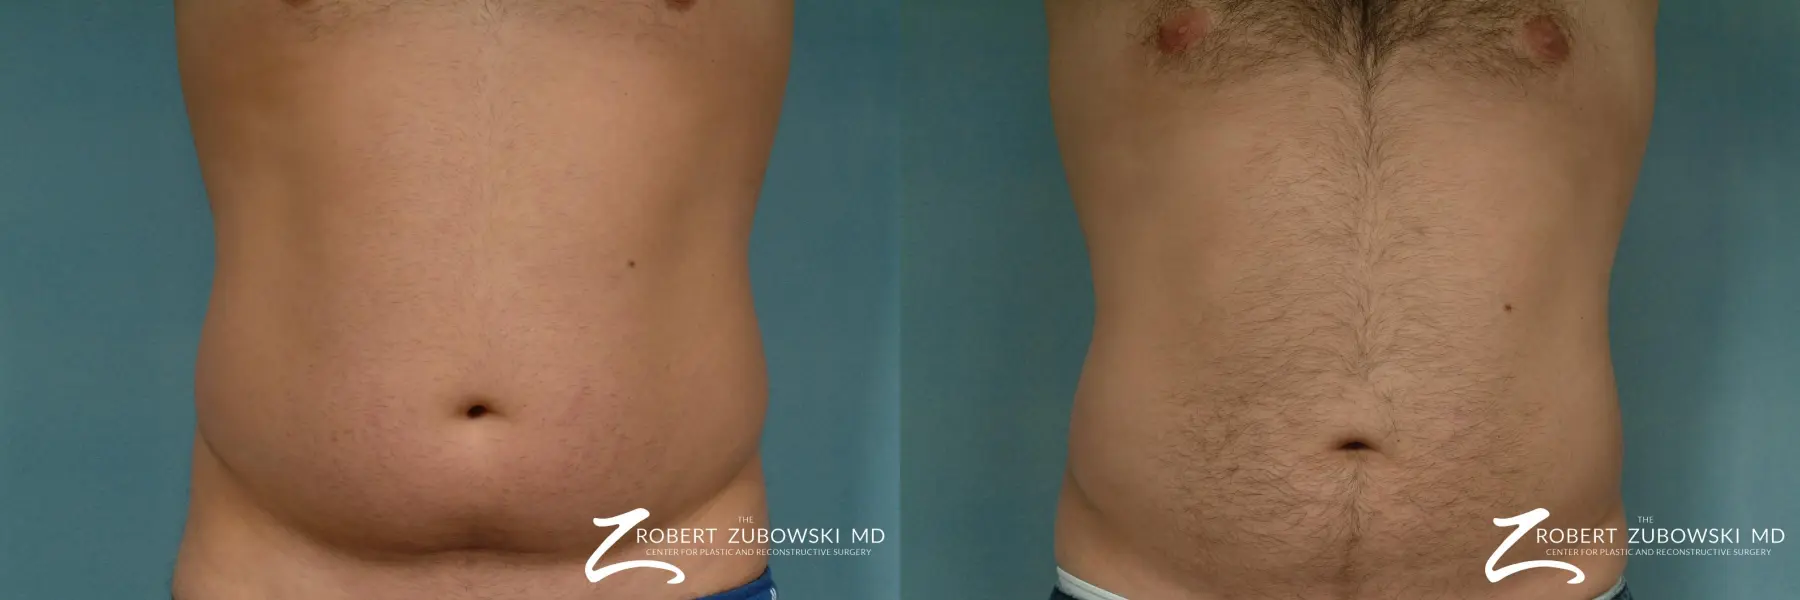 Liposuction: Patient 19 - Before and After 1